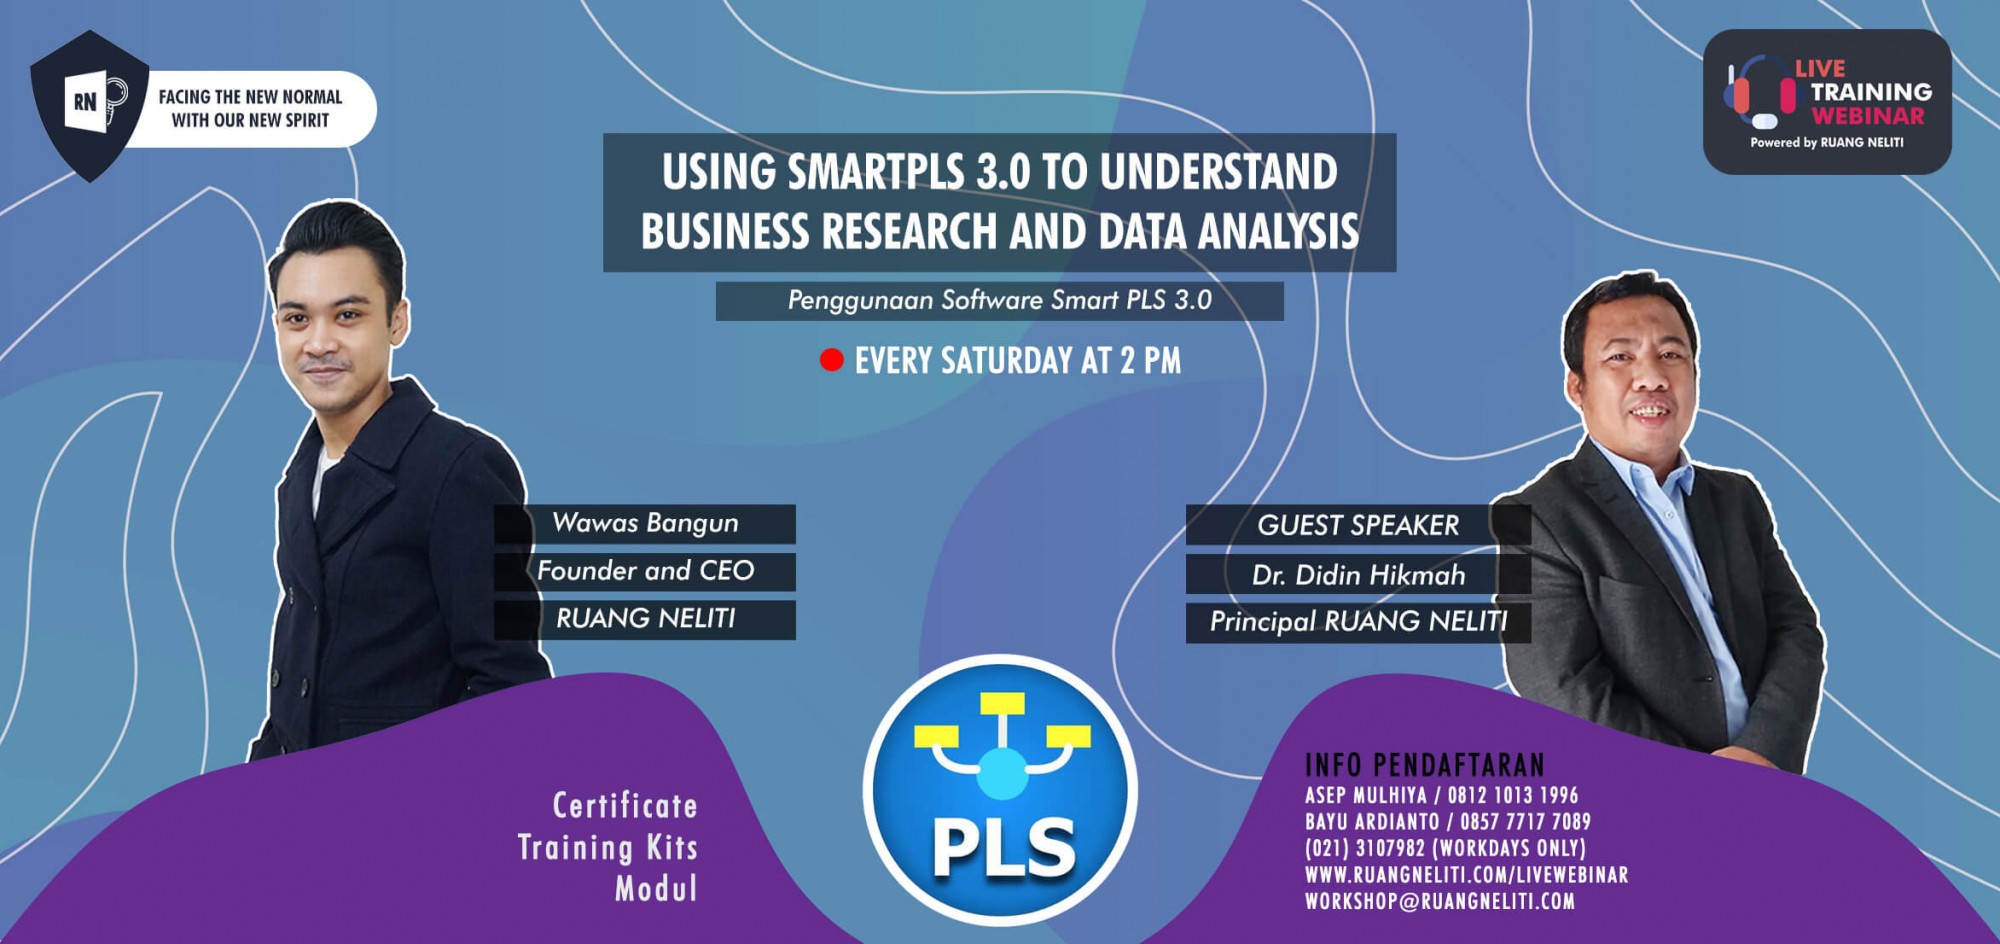 LIVE WEBINAR : USING SMARTPLS 3.0 TO UNDERSTAND RESEARCH AND DATA ANALYSIS